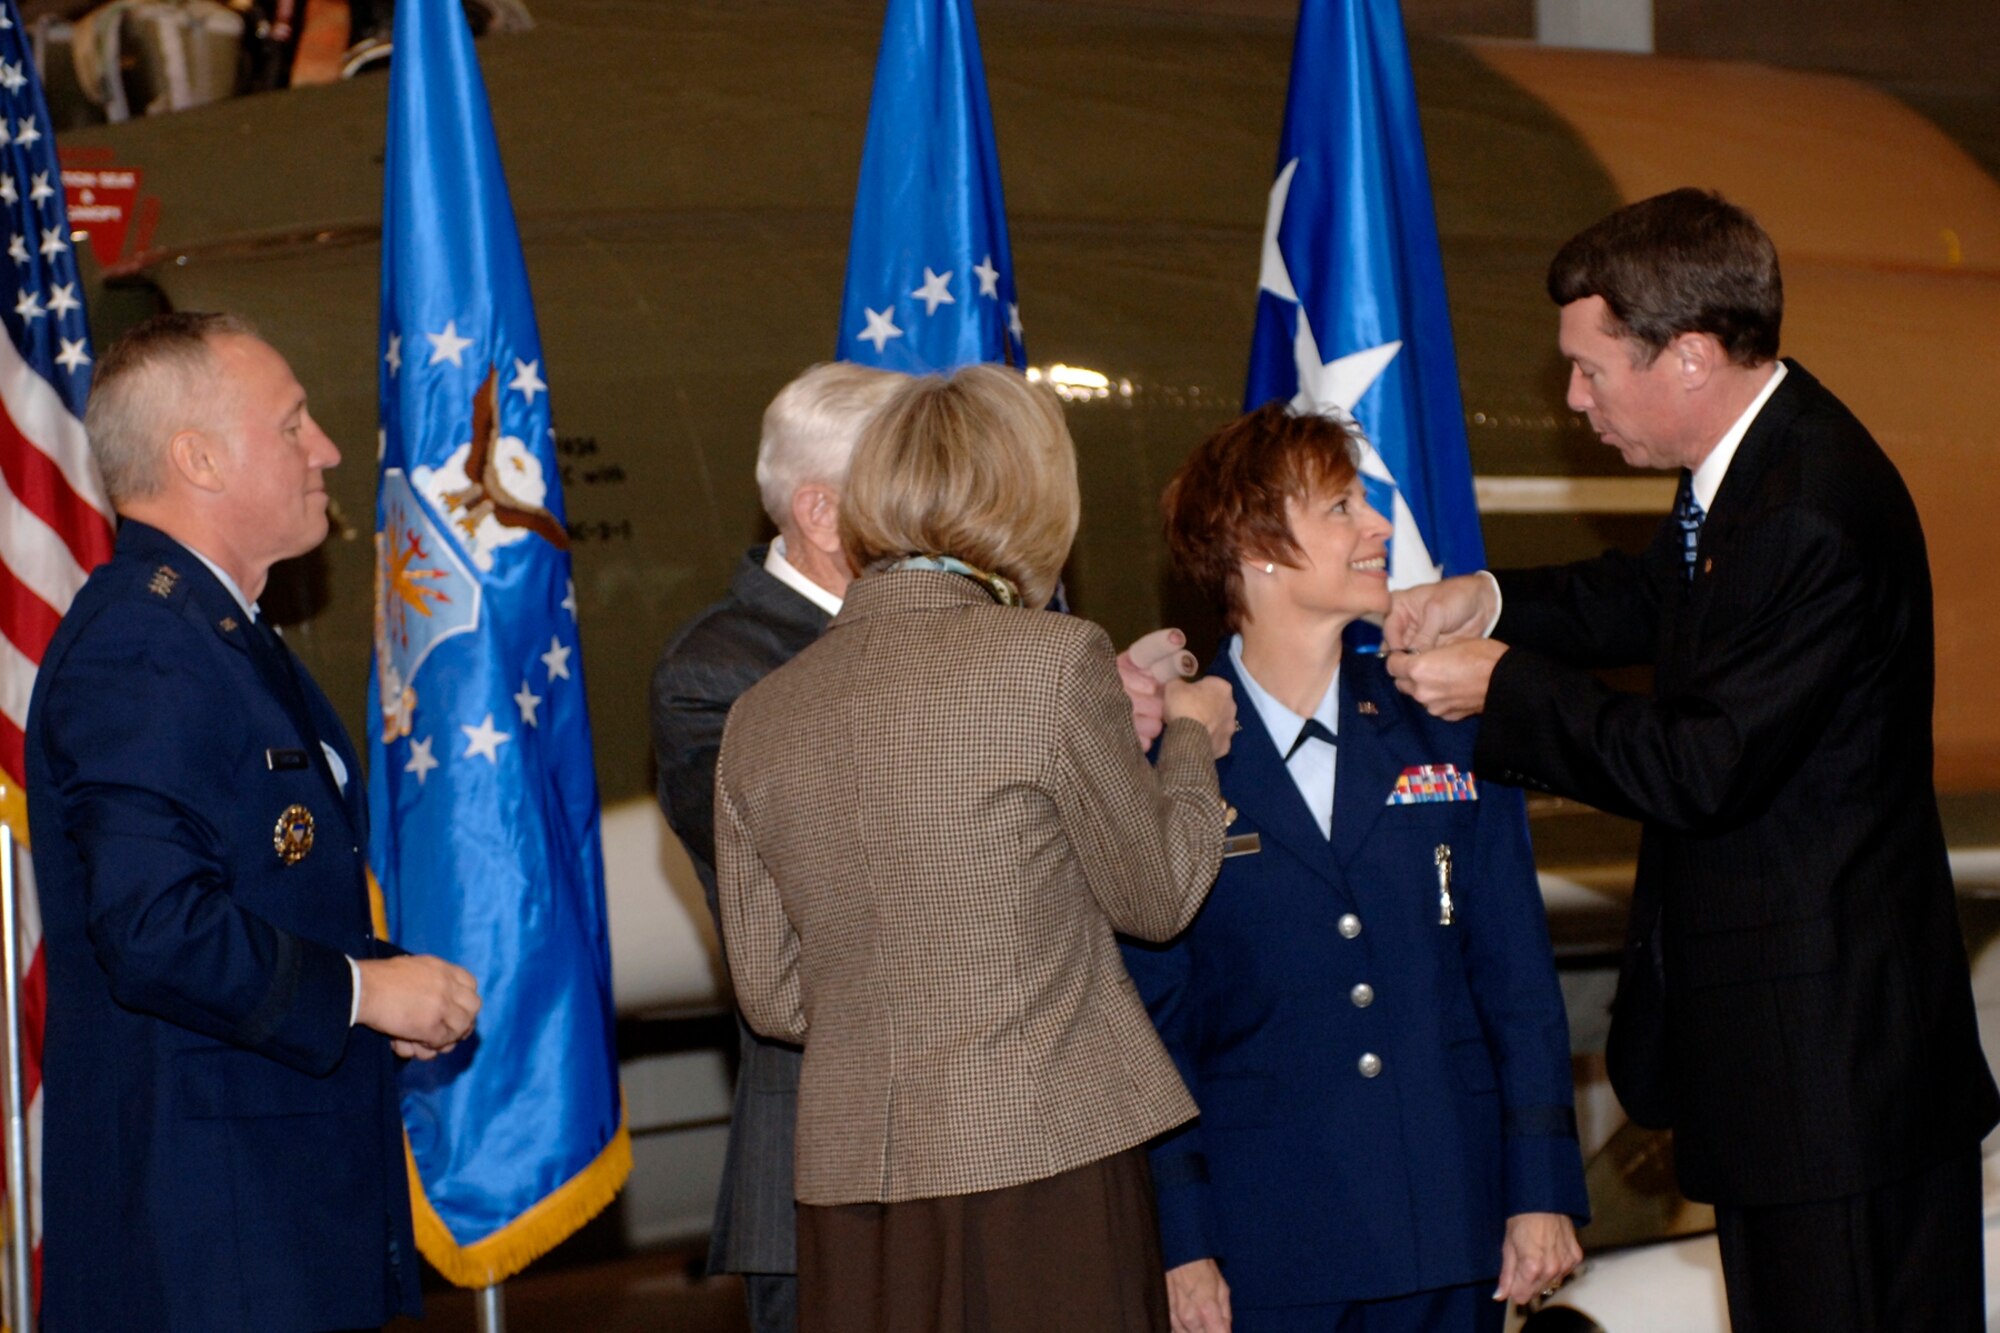 HILL AIR FORCE BASE, Utah-- Newly promoted Maj. Gen. Kathleen Close gets her second-star pinned on by her husband retired Col. Mike Close, her sister Patricia Balph, and her godfather retired Col. Patrick Kenny. (U.S. Air Force photo by Todd Cromar)